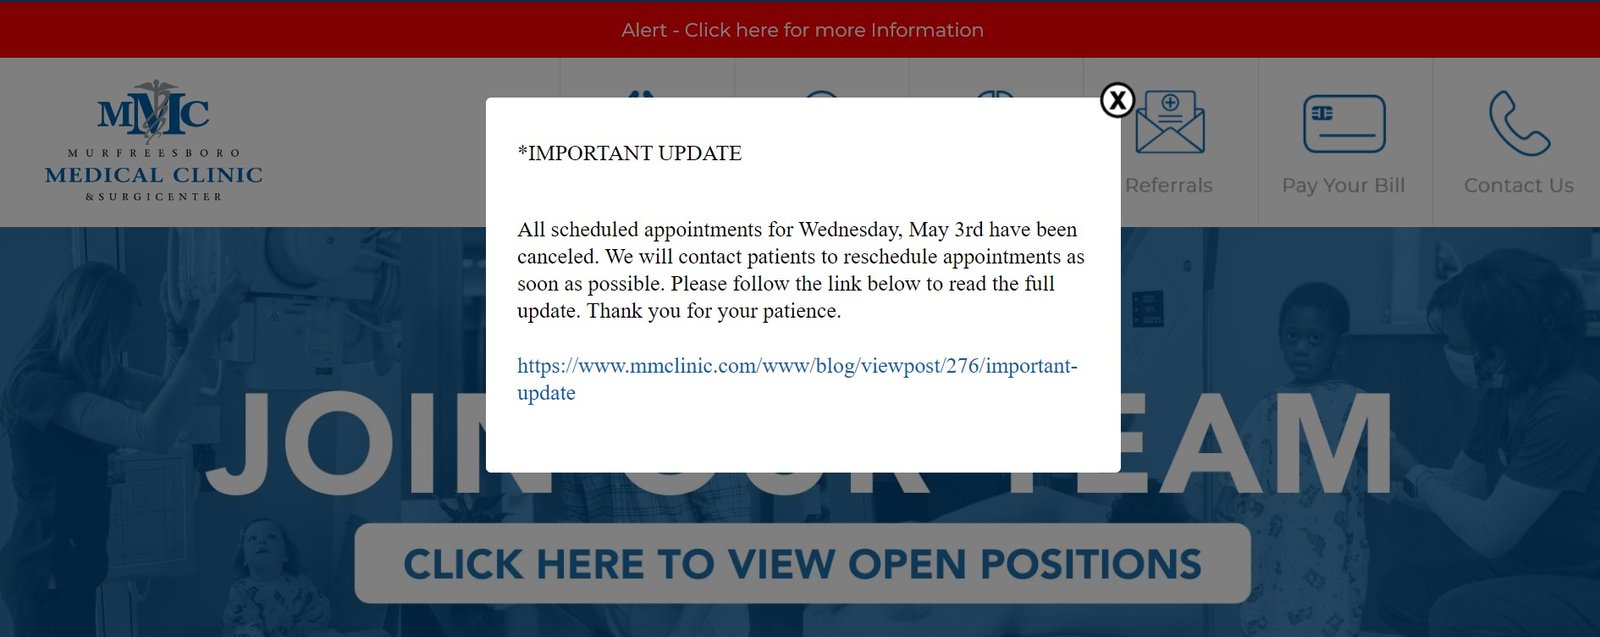 Popup alert on website home page notifies patients "All scheduled appointments for Wednesday, May 3rd have been canceled. We will contact patients to reschedule appointments as soon as possible. "